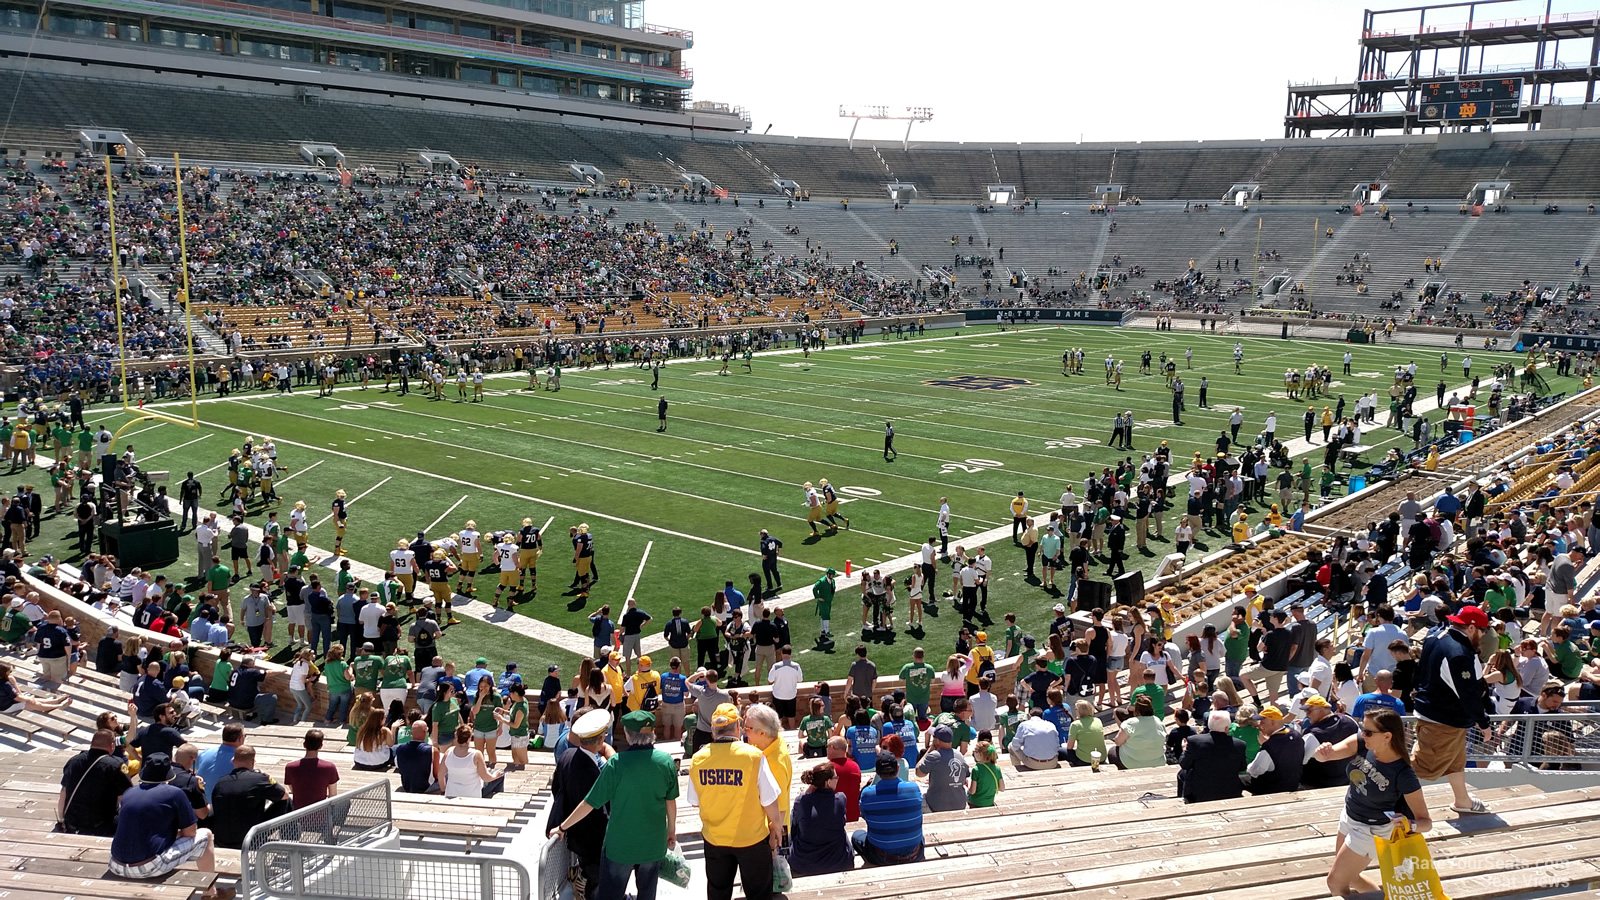 section 33, row 37 seat view  - notre dame stadium